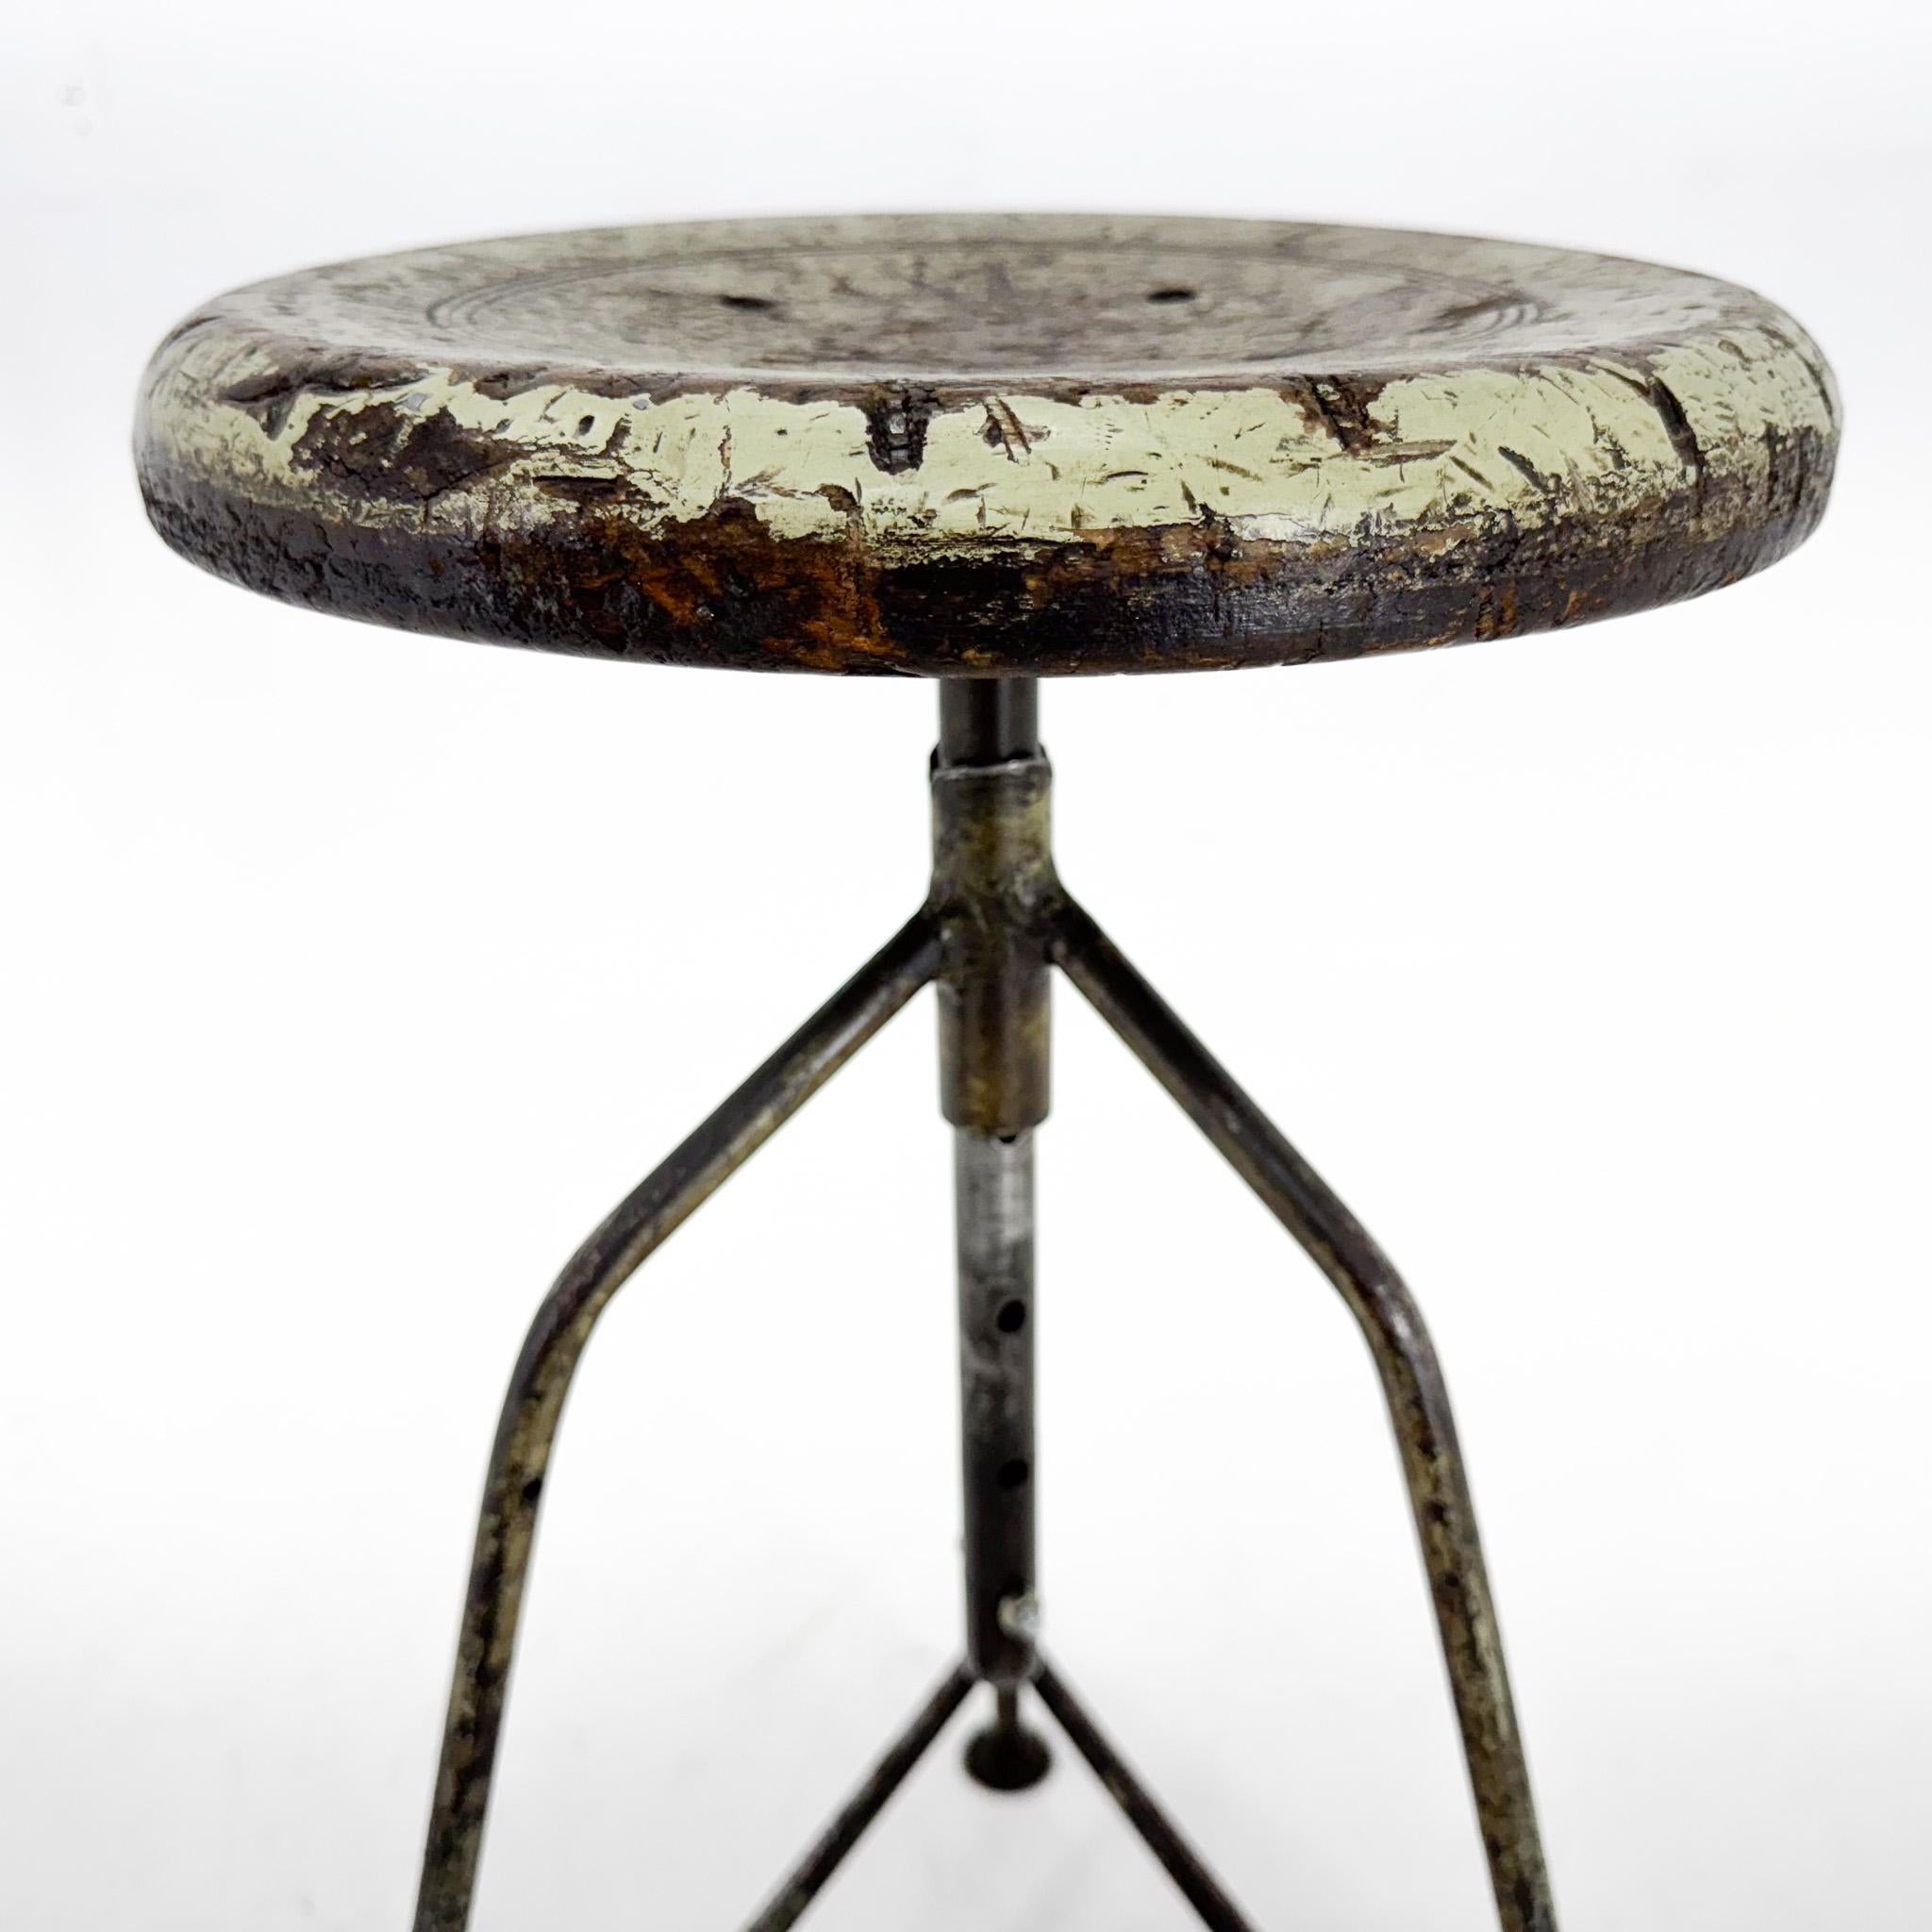 Vintage Industrial Steel & Wood Tripod Stool with Original Patina, 1950's For Sale 1